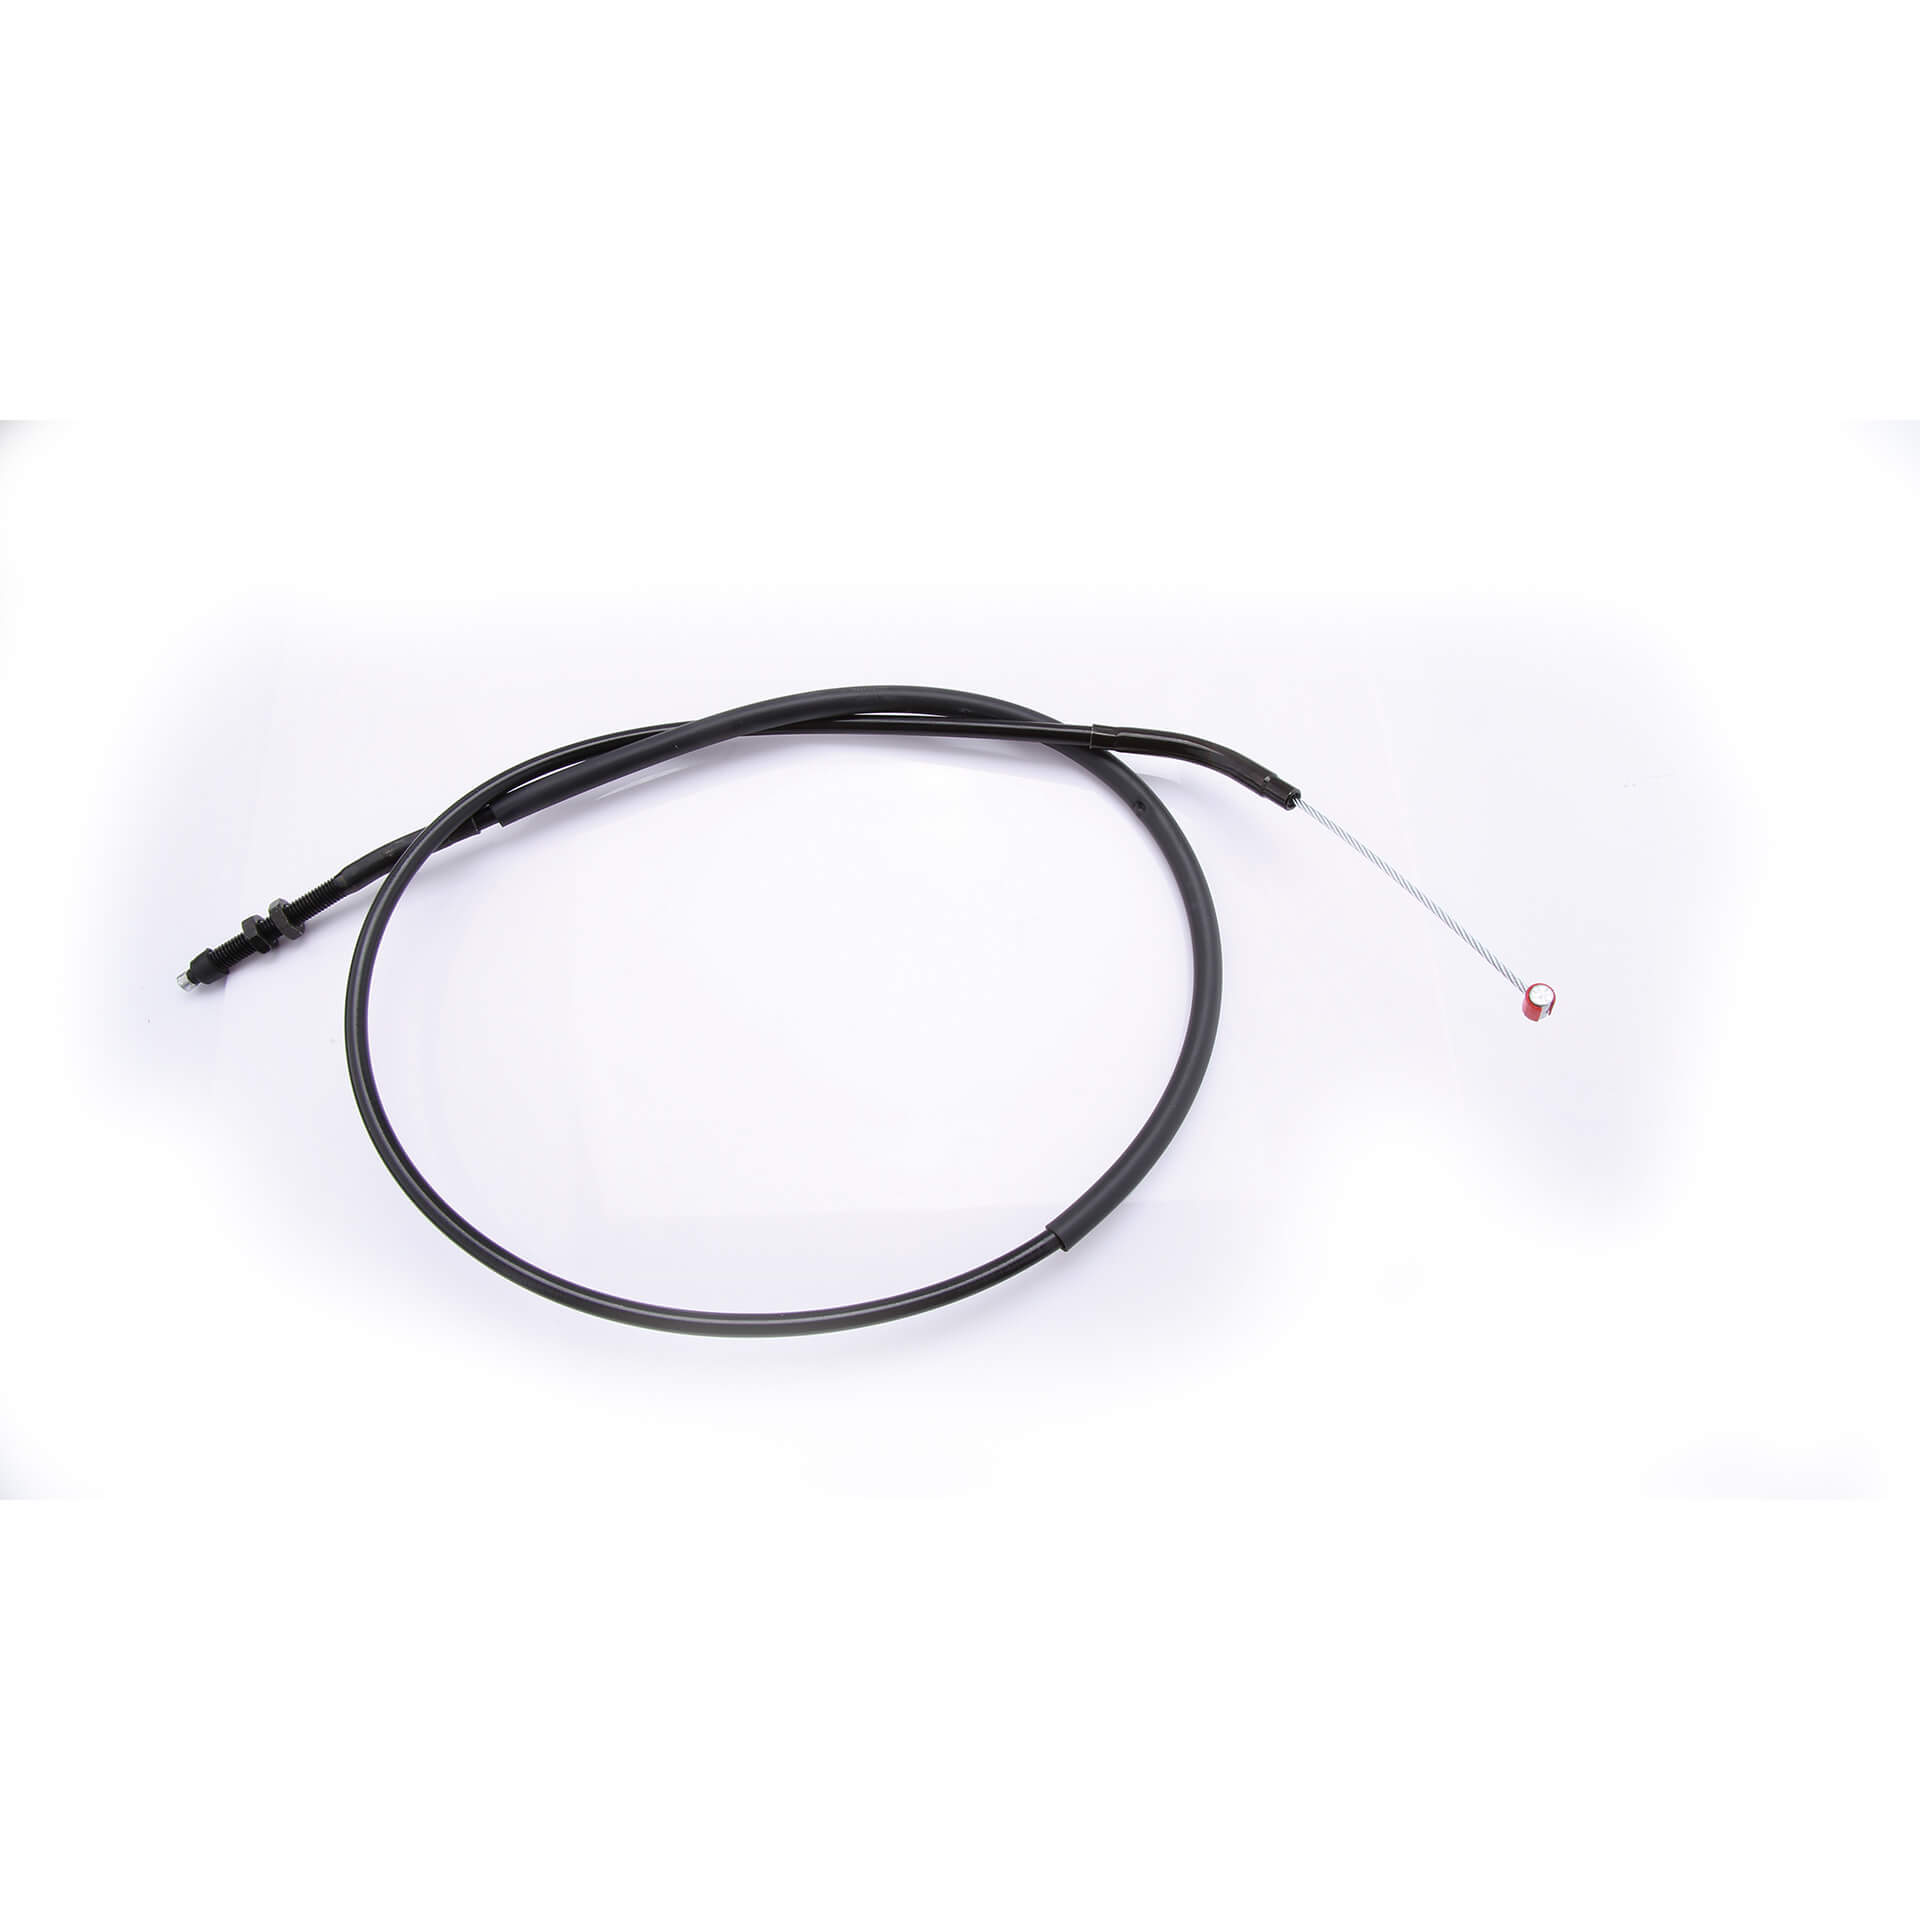 lsl Spare part, clutch cable for SB-Kit Thruxton